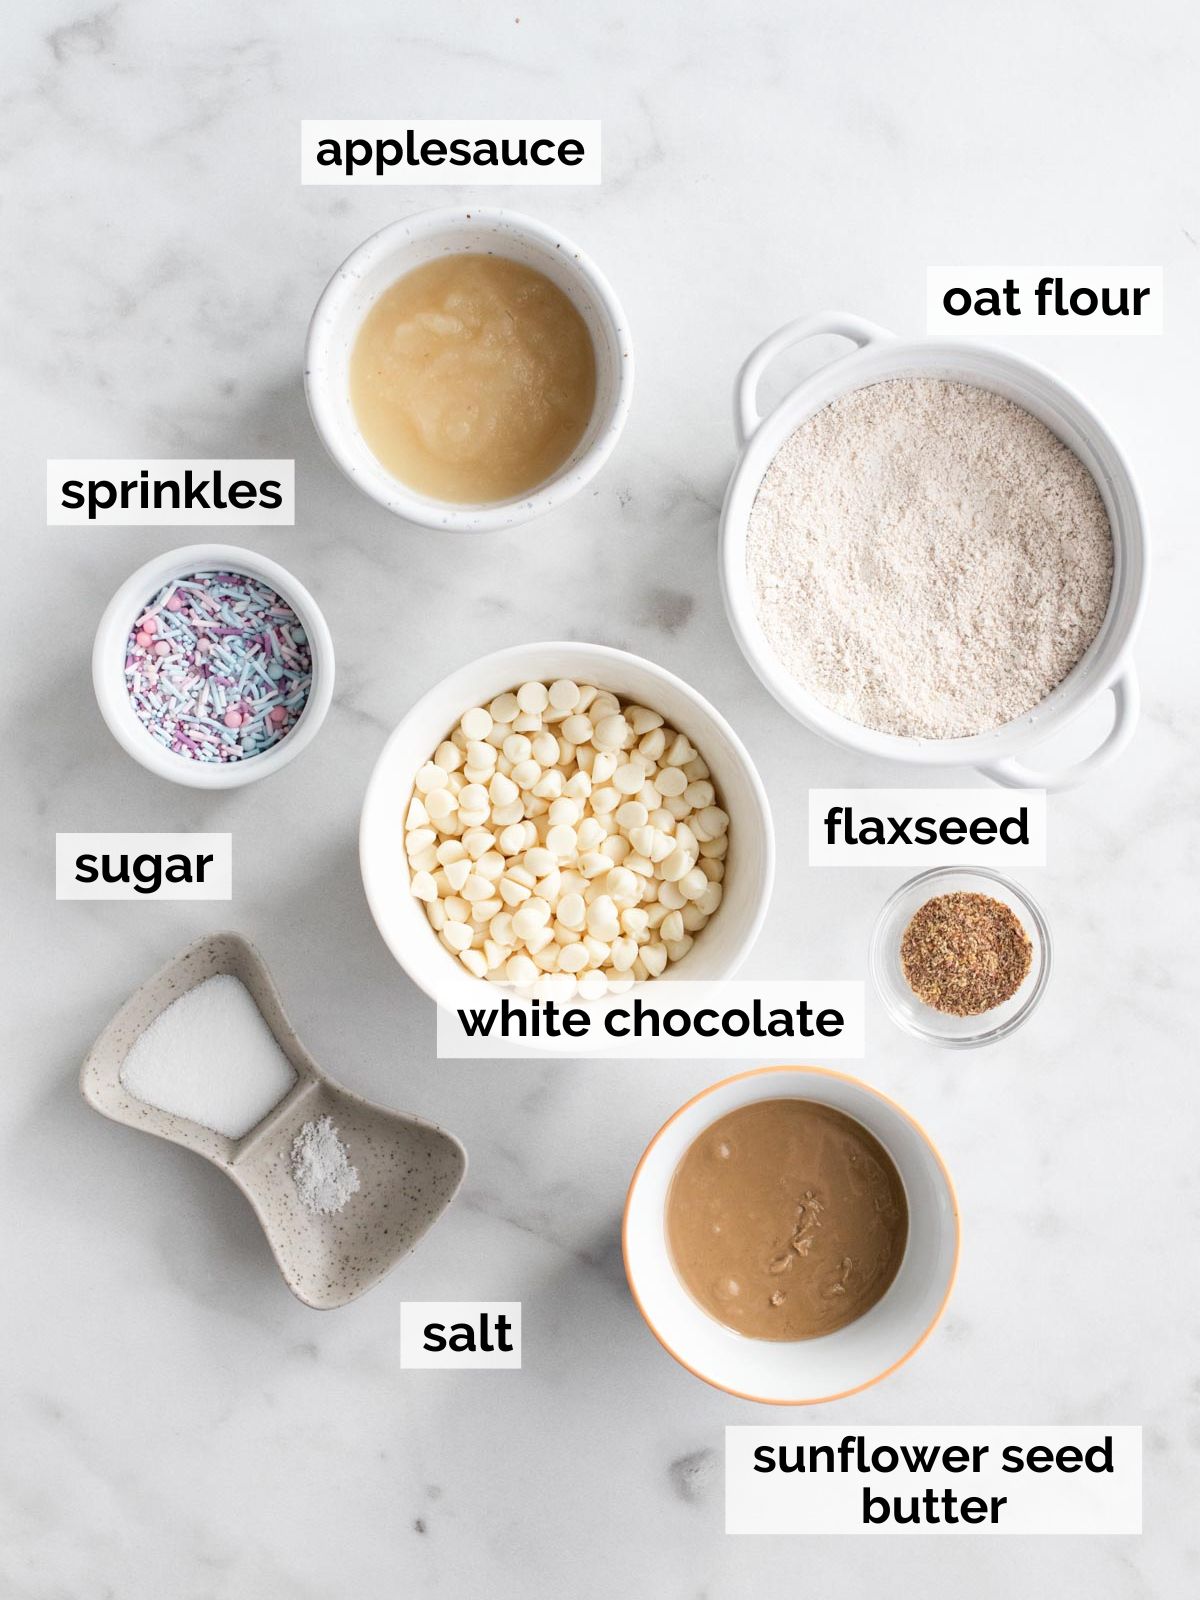 Cake pop ingredients on a marble table.